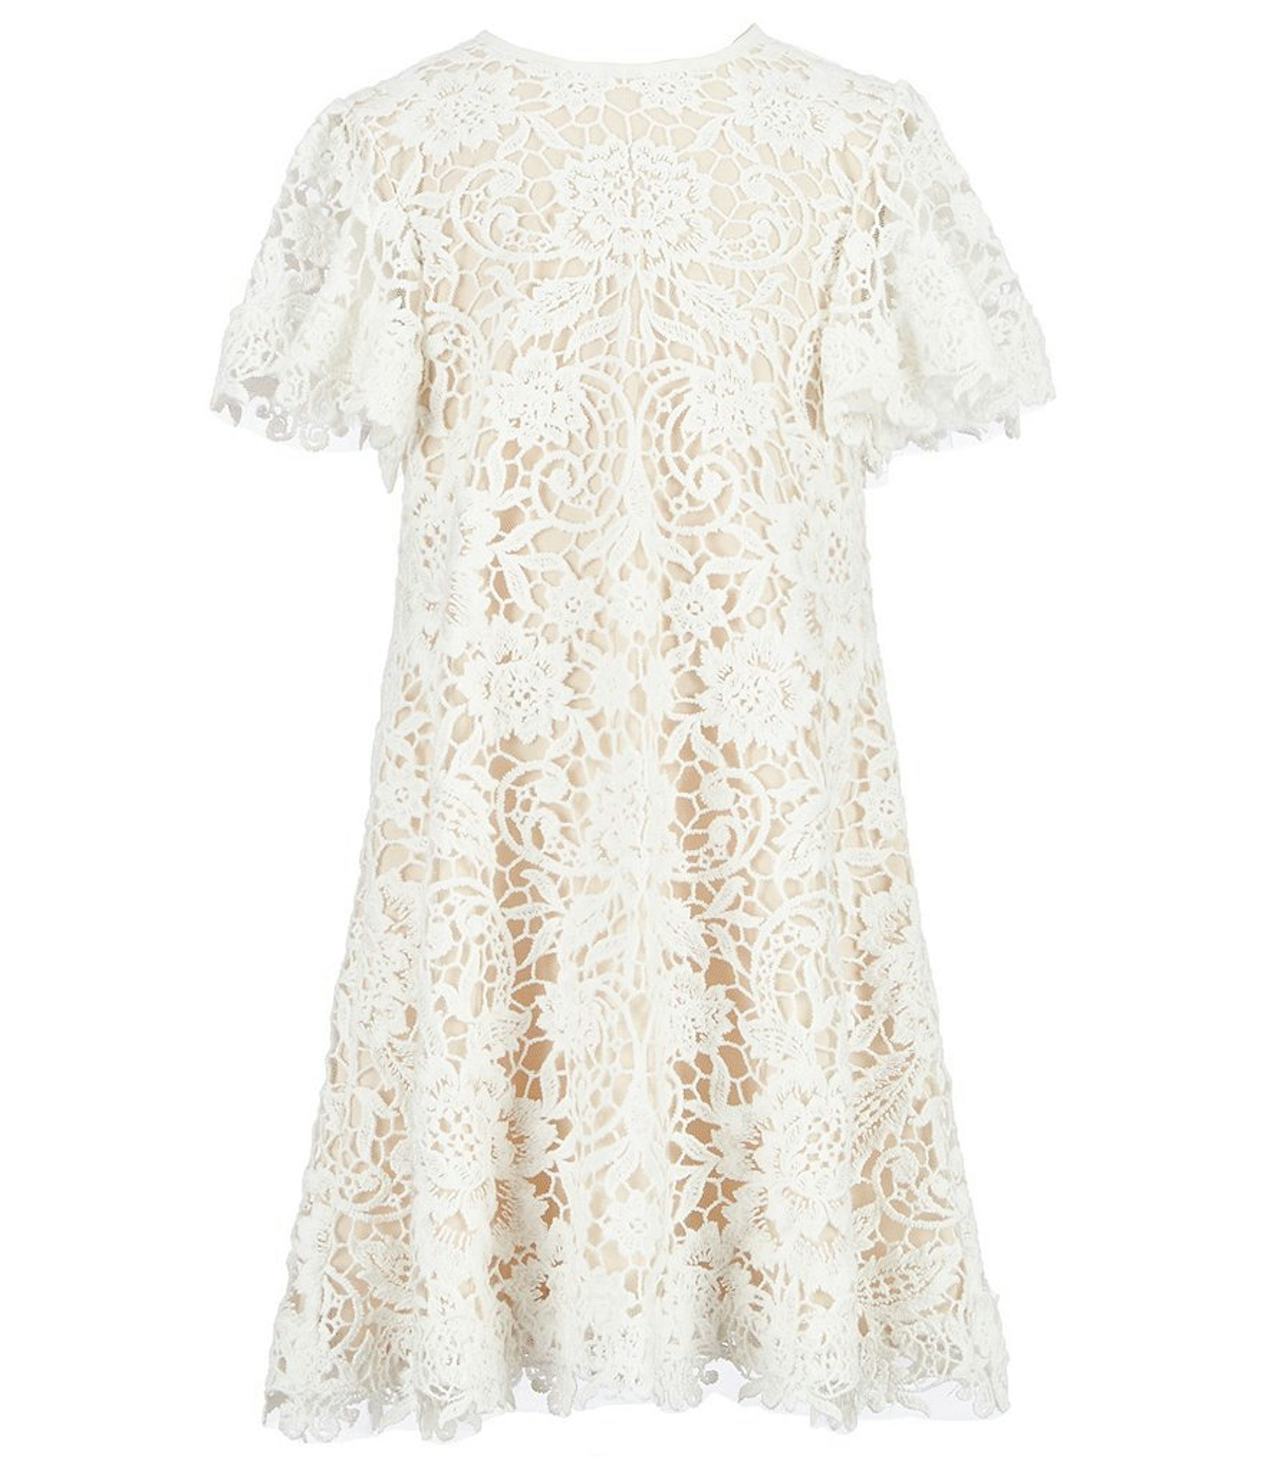 16 Boho Flower Girl Dresses So Cute, They'll Steal The Show — Well, Almost